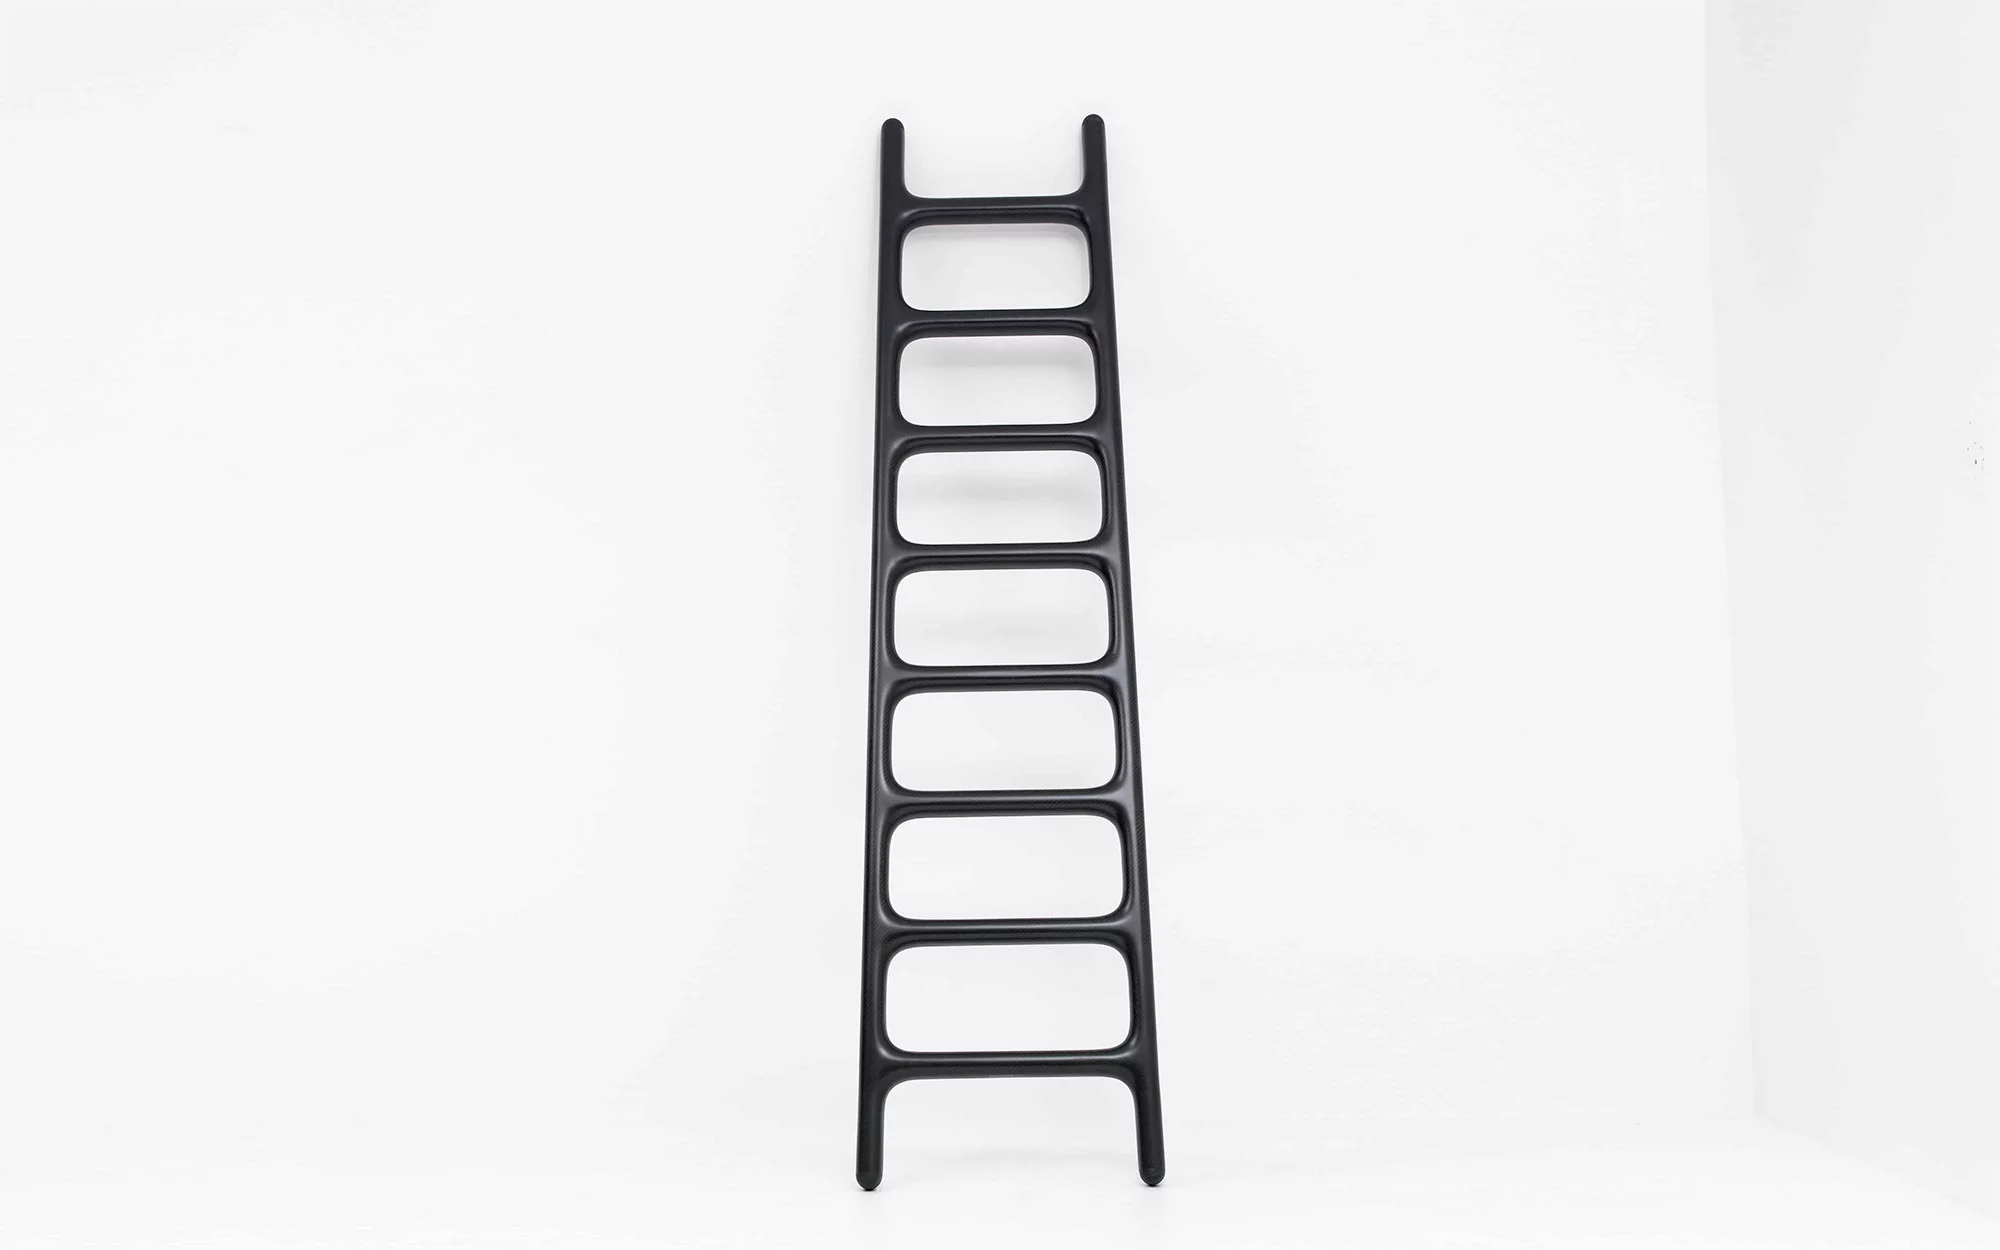 Carbon Ladder - Marc Newson - miscellaneous - Galerie kreo